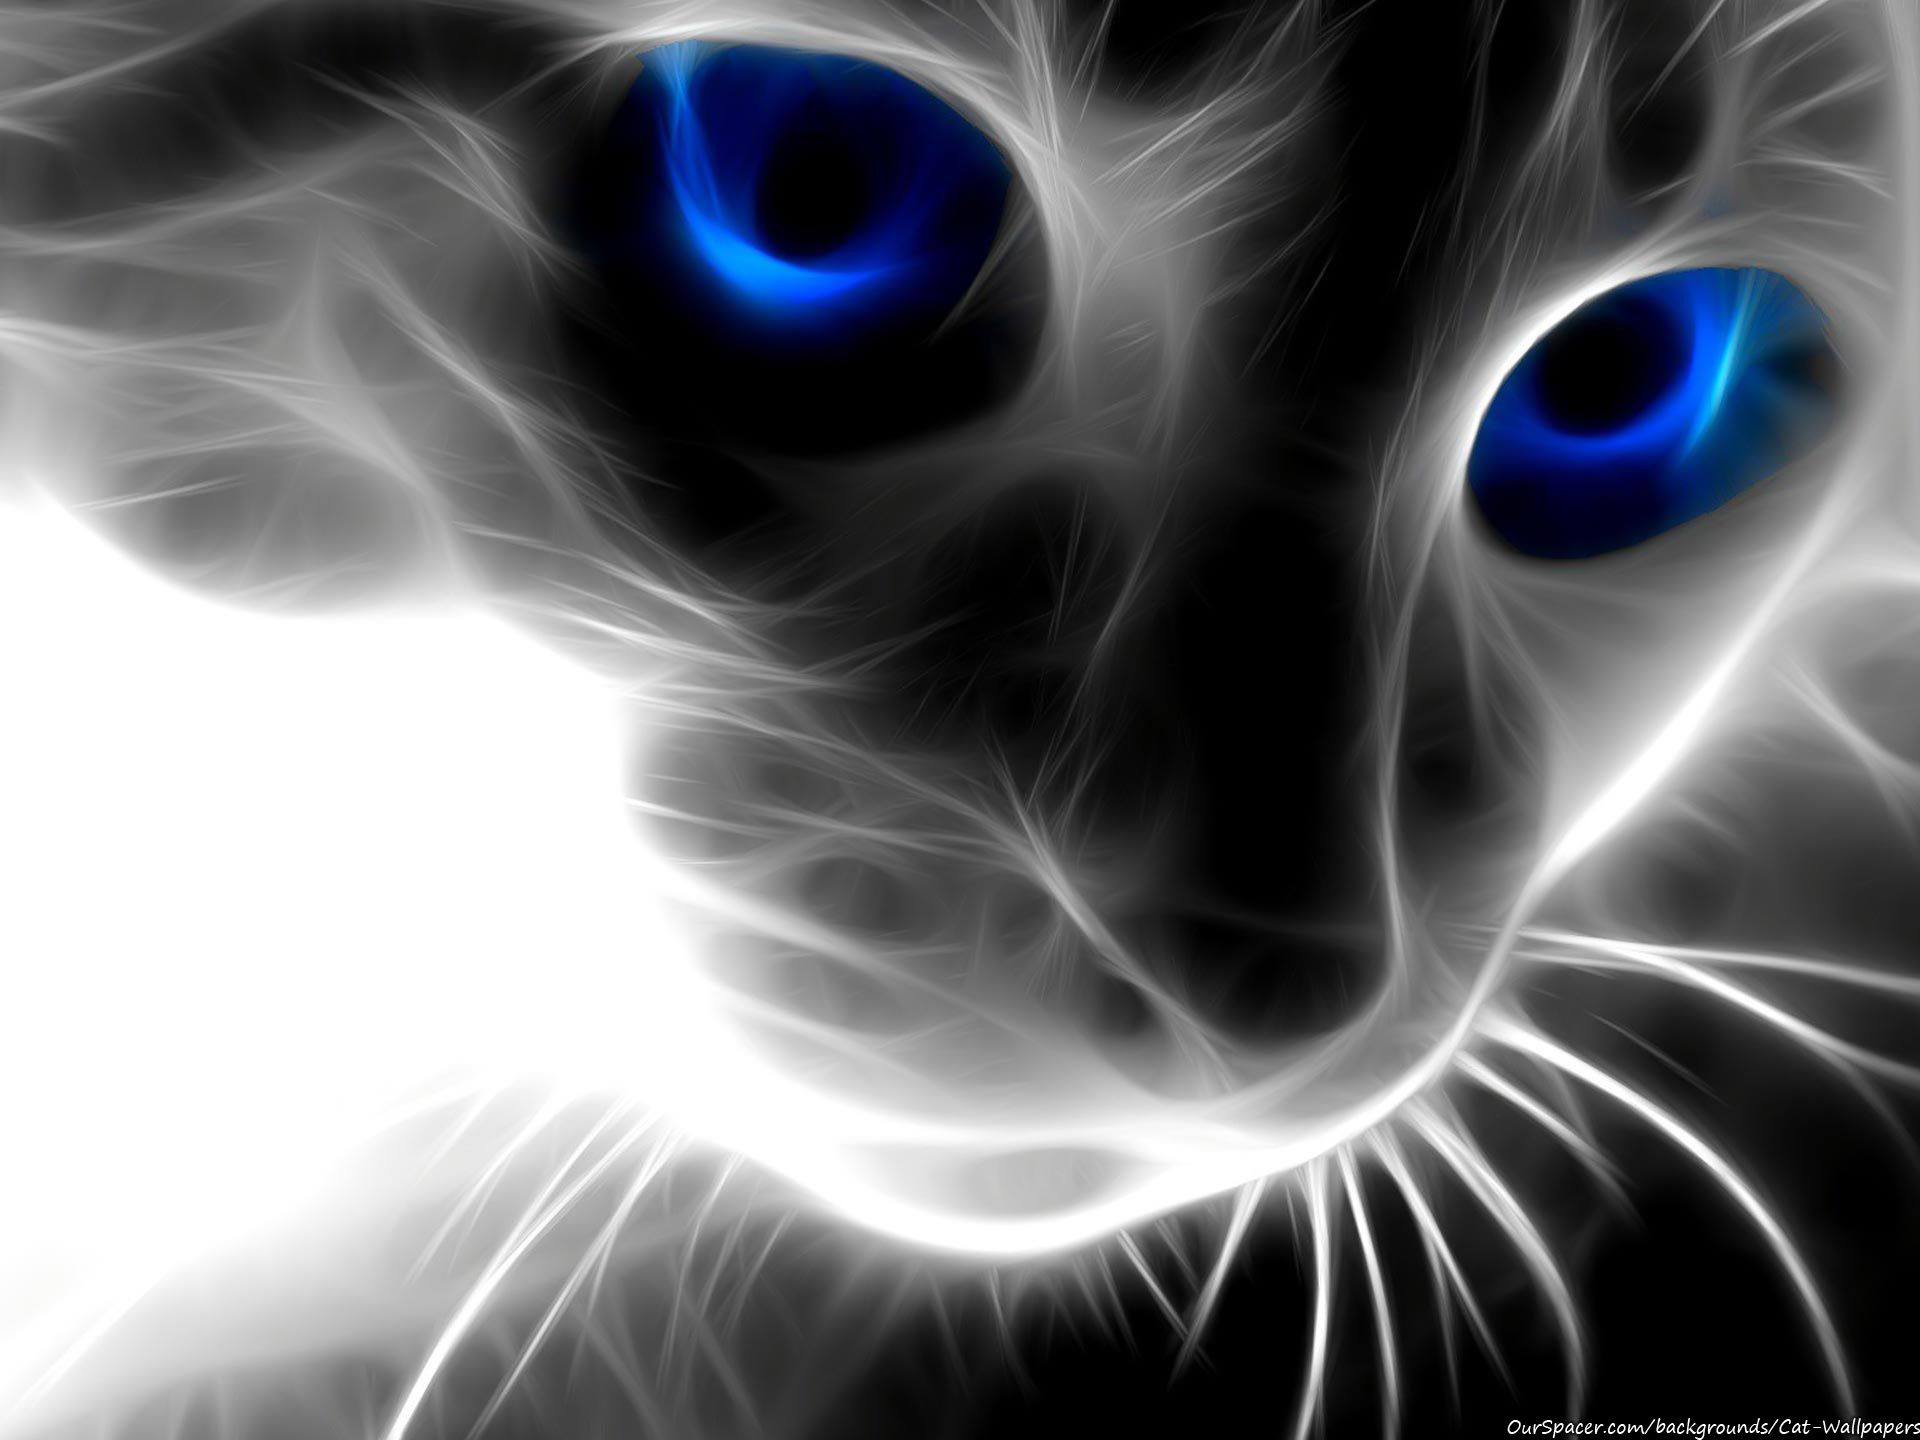 Transparent cat made of light with blue eyes wallpaper and background for myspace and twitter layouts